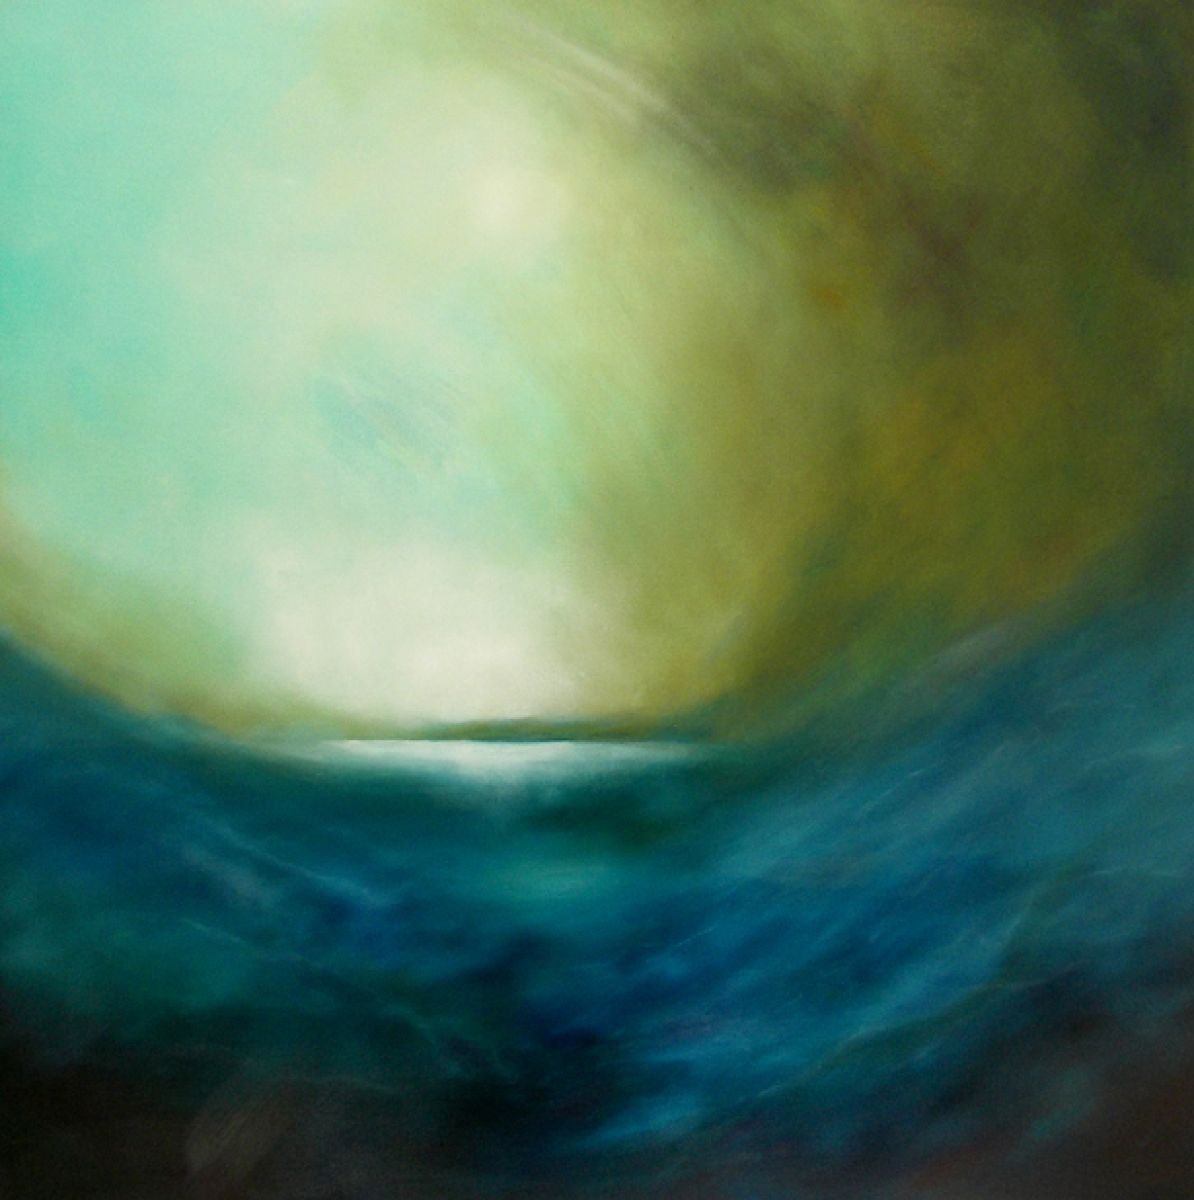 Landfall, Storm Coming On - 90cm x 90cm oil on box canvas by Colin Robson